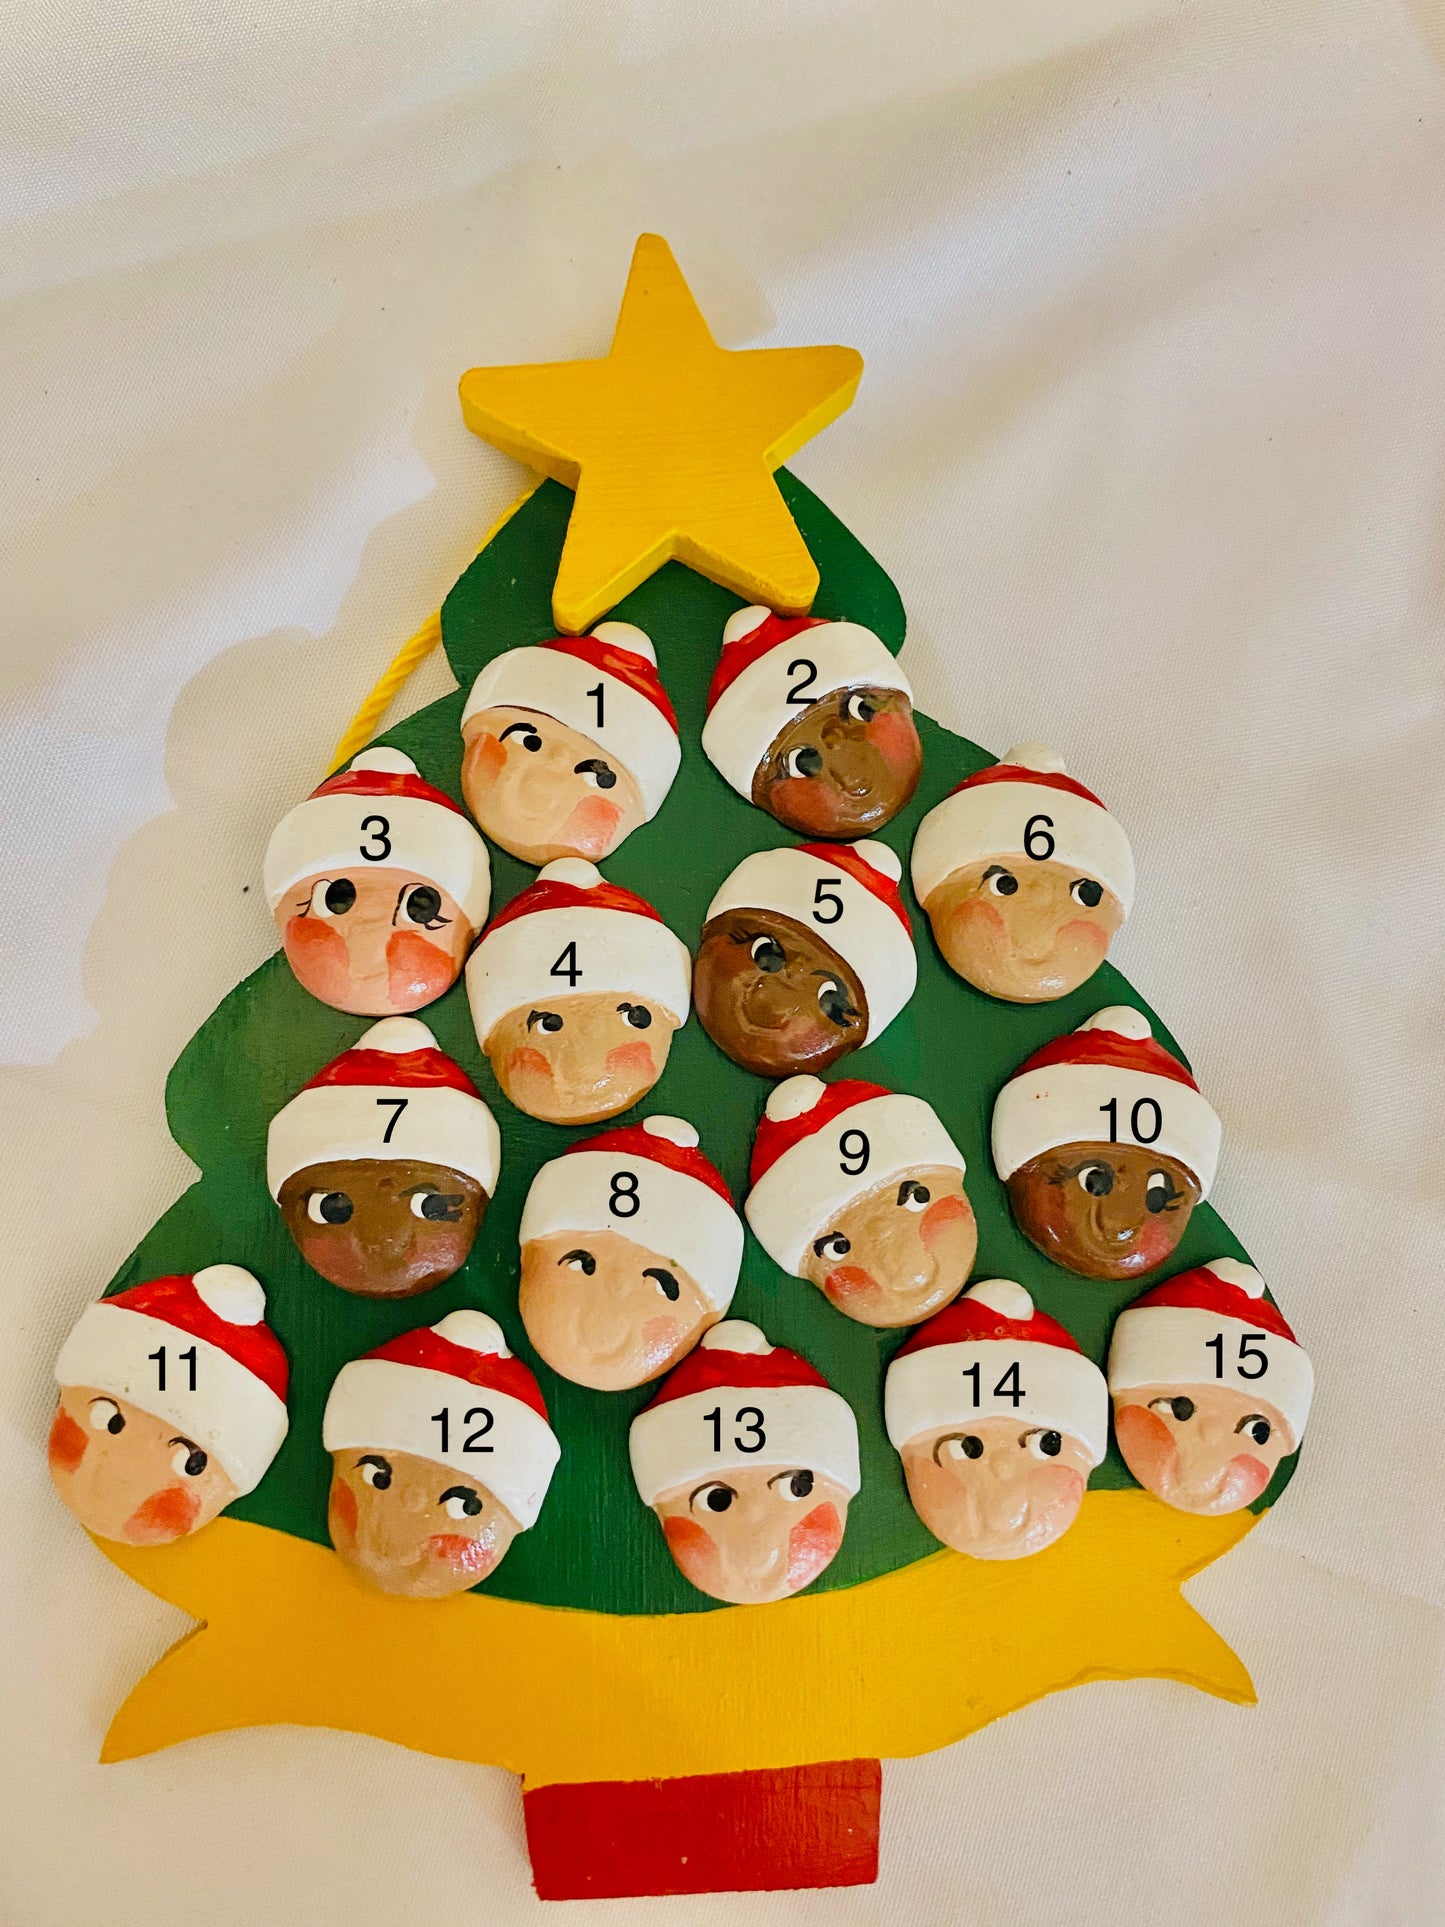 Personalized Ornament 15 Santa Faces on a Christmas Tree  6" x 4.5"